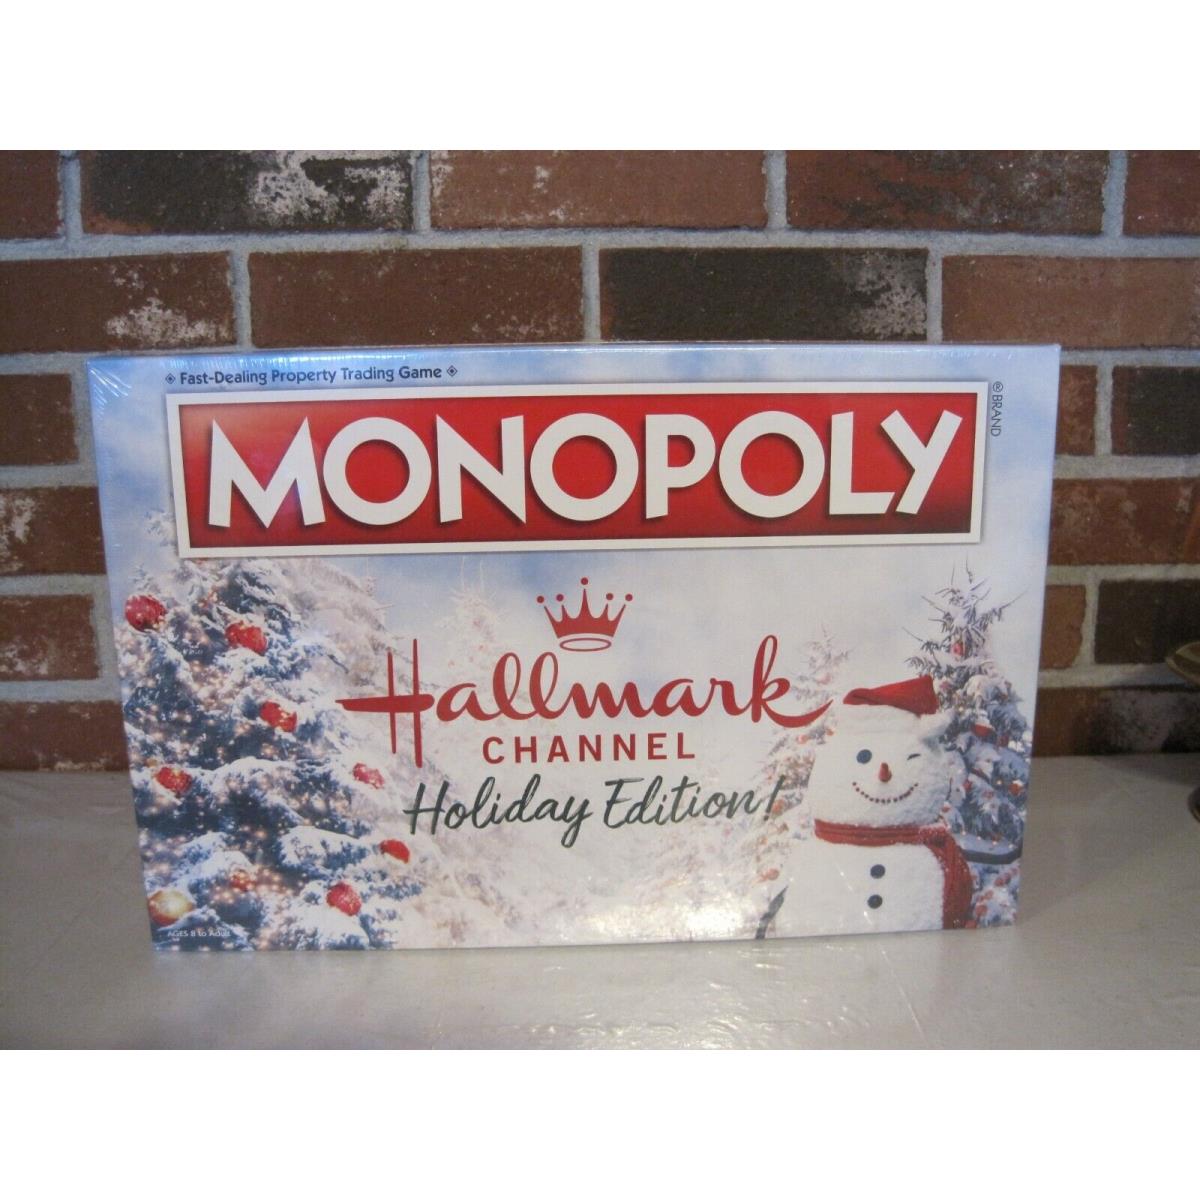 2020 Monopoly Hallmark Channel Holiday Edition Property Trading Game--new